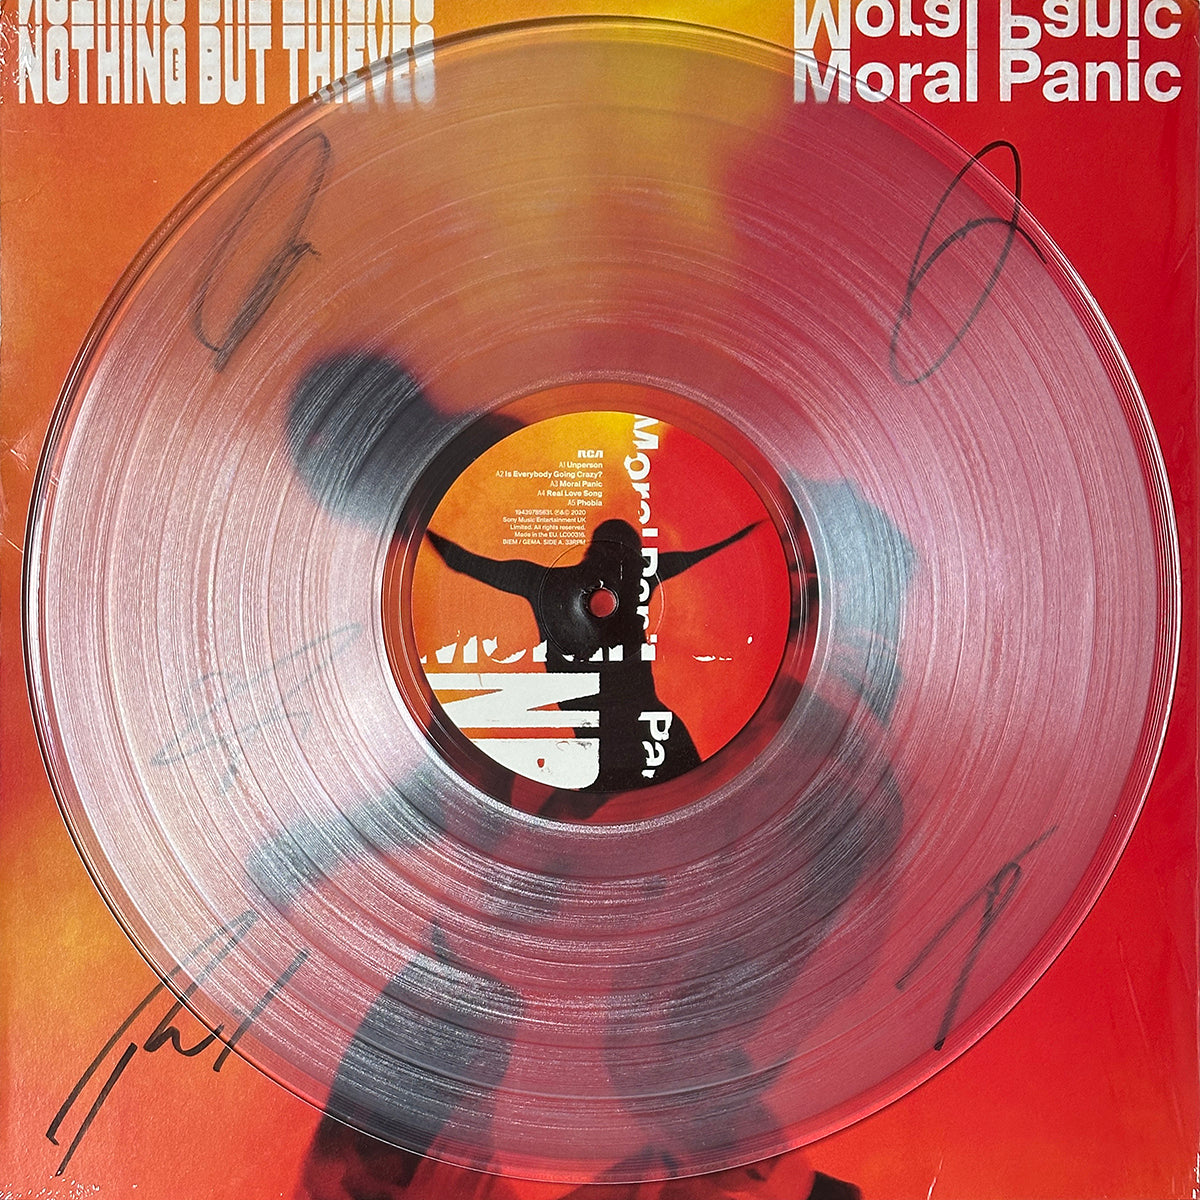 Moral Panic (Signed)